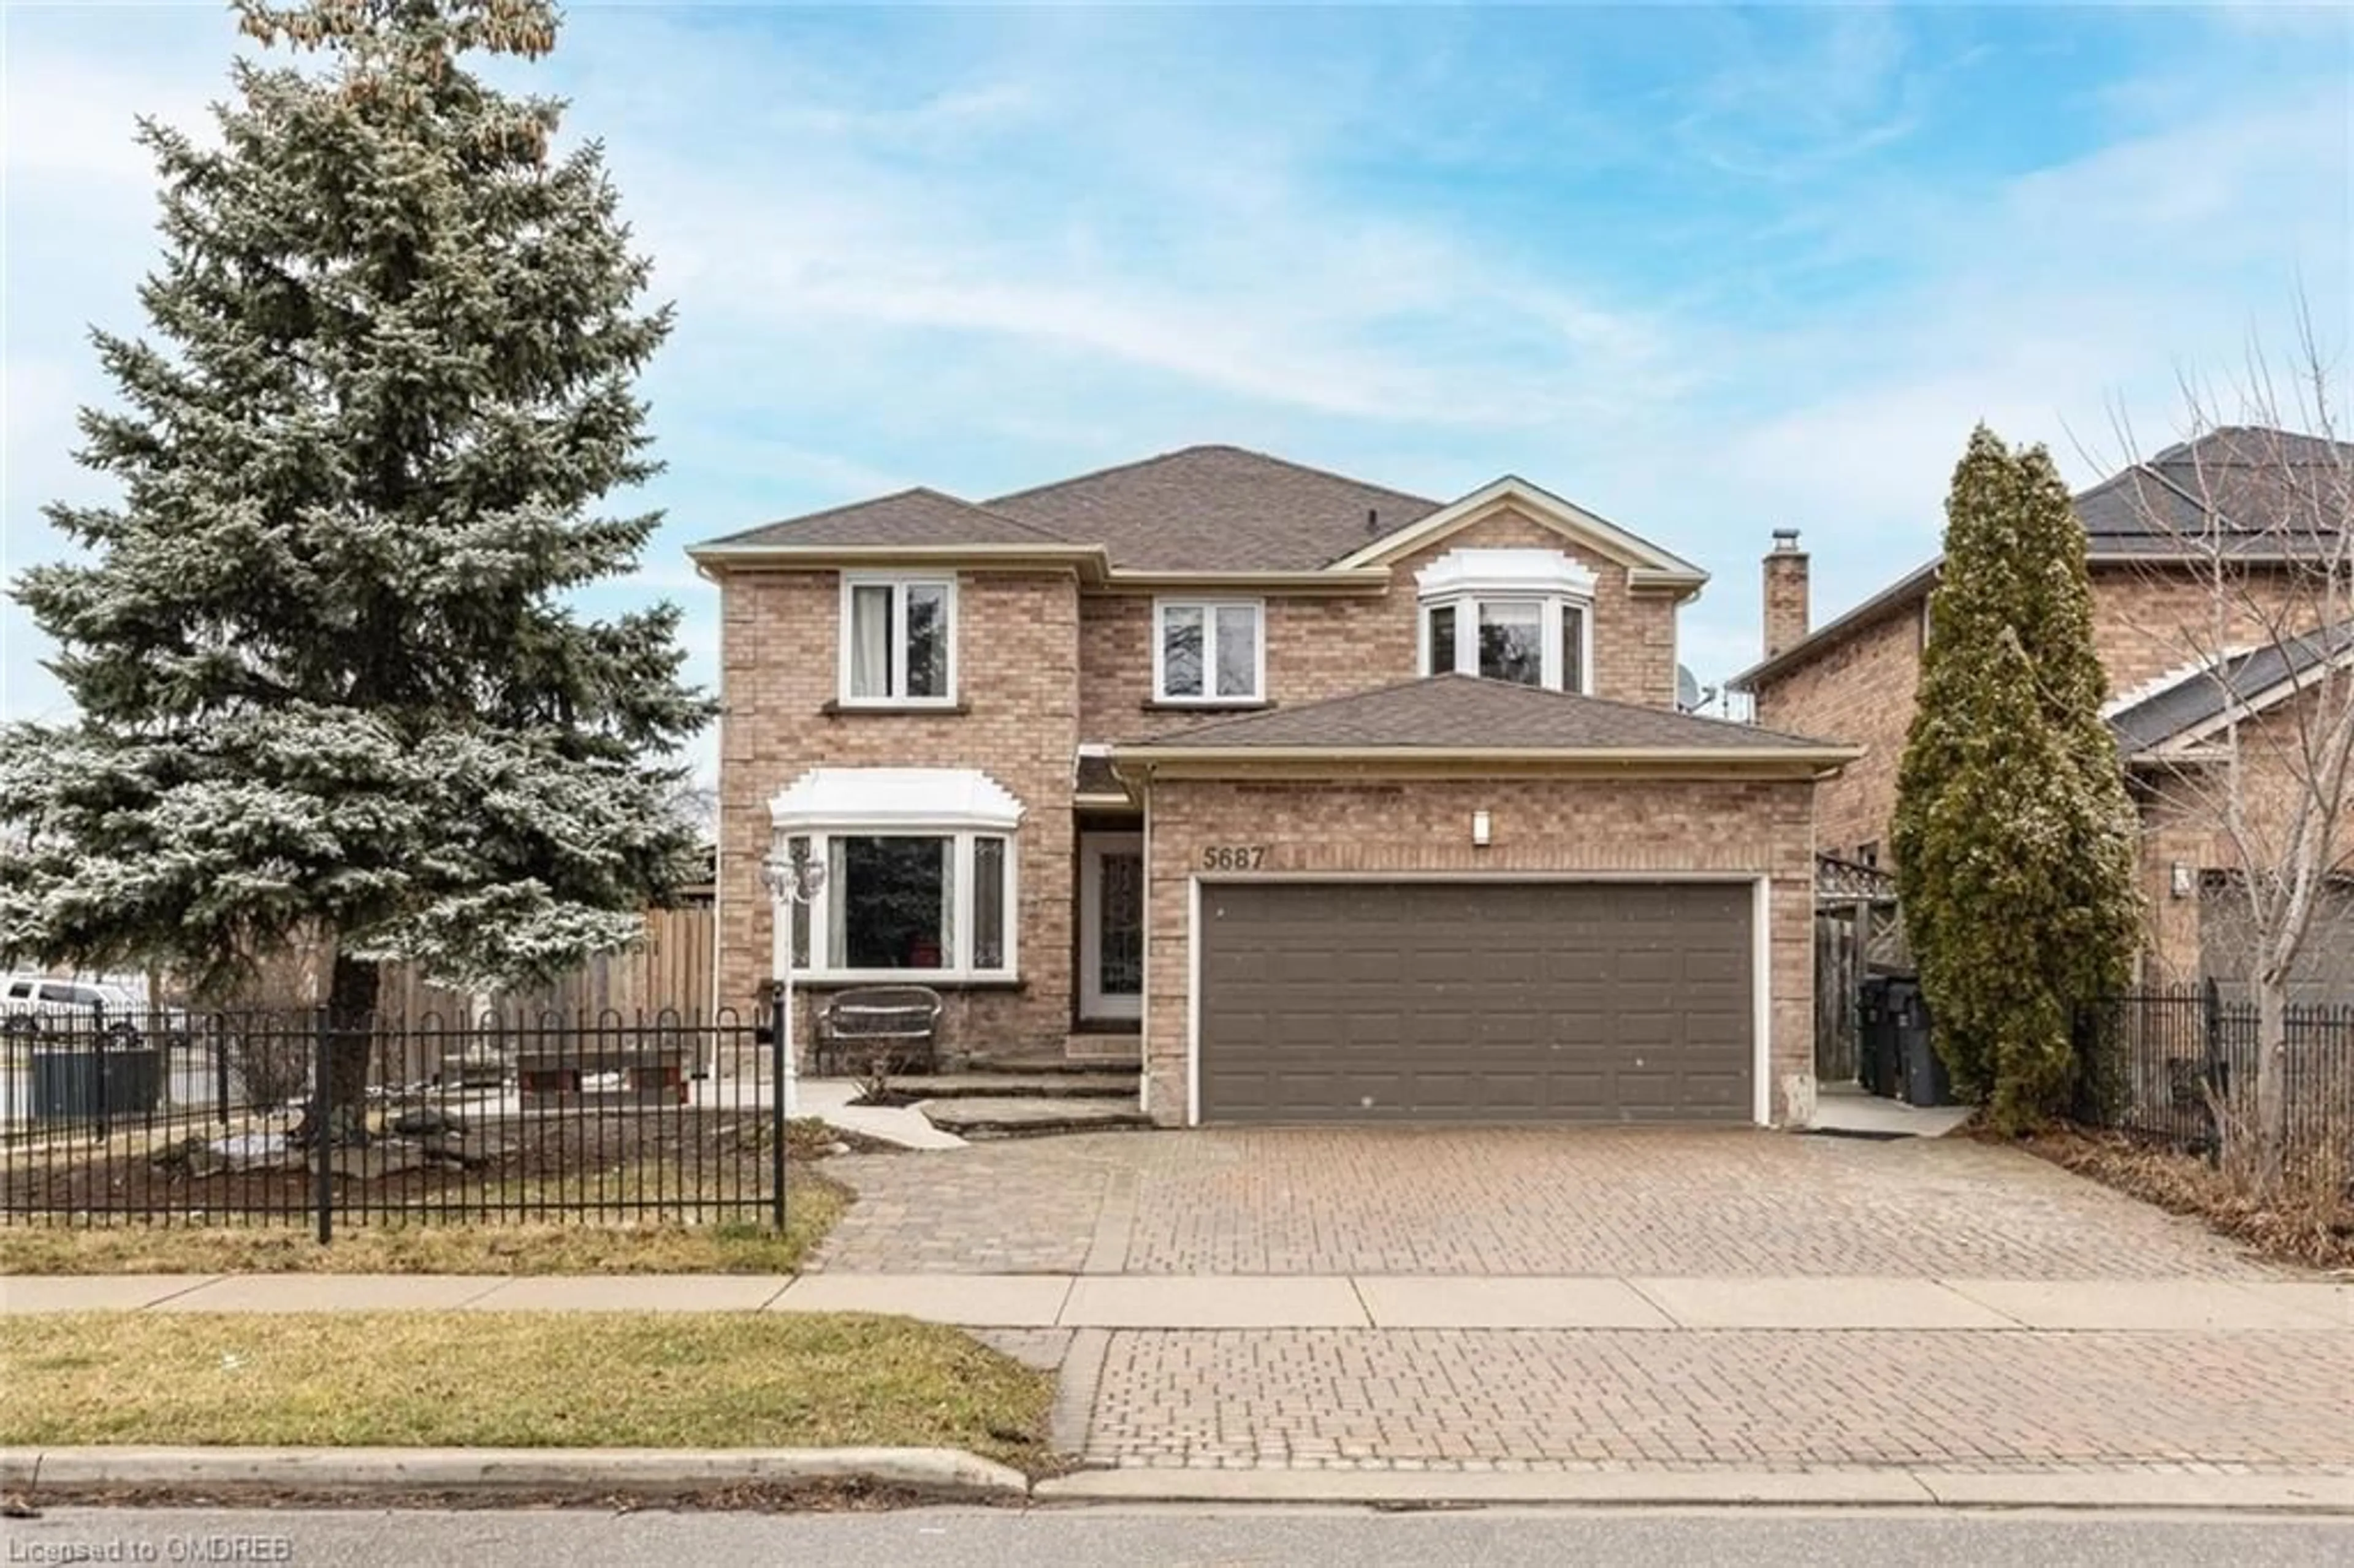 Home with brick exterior material for 5687 Goldenbrook Dr, Mississauga Ontario L5M 3W5